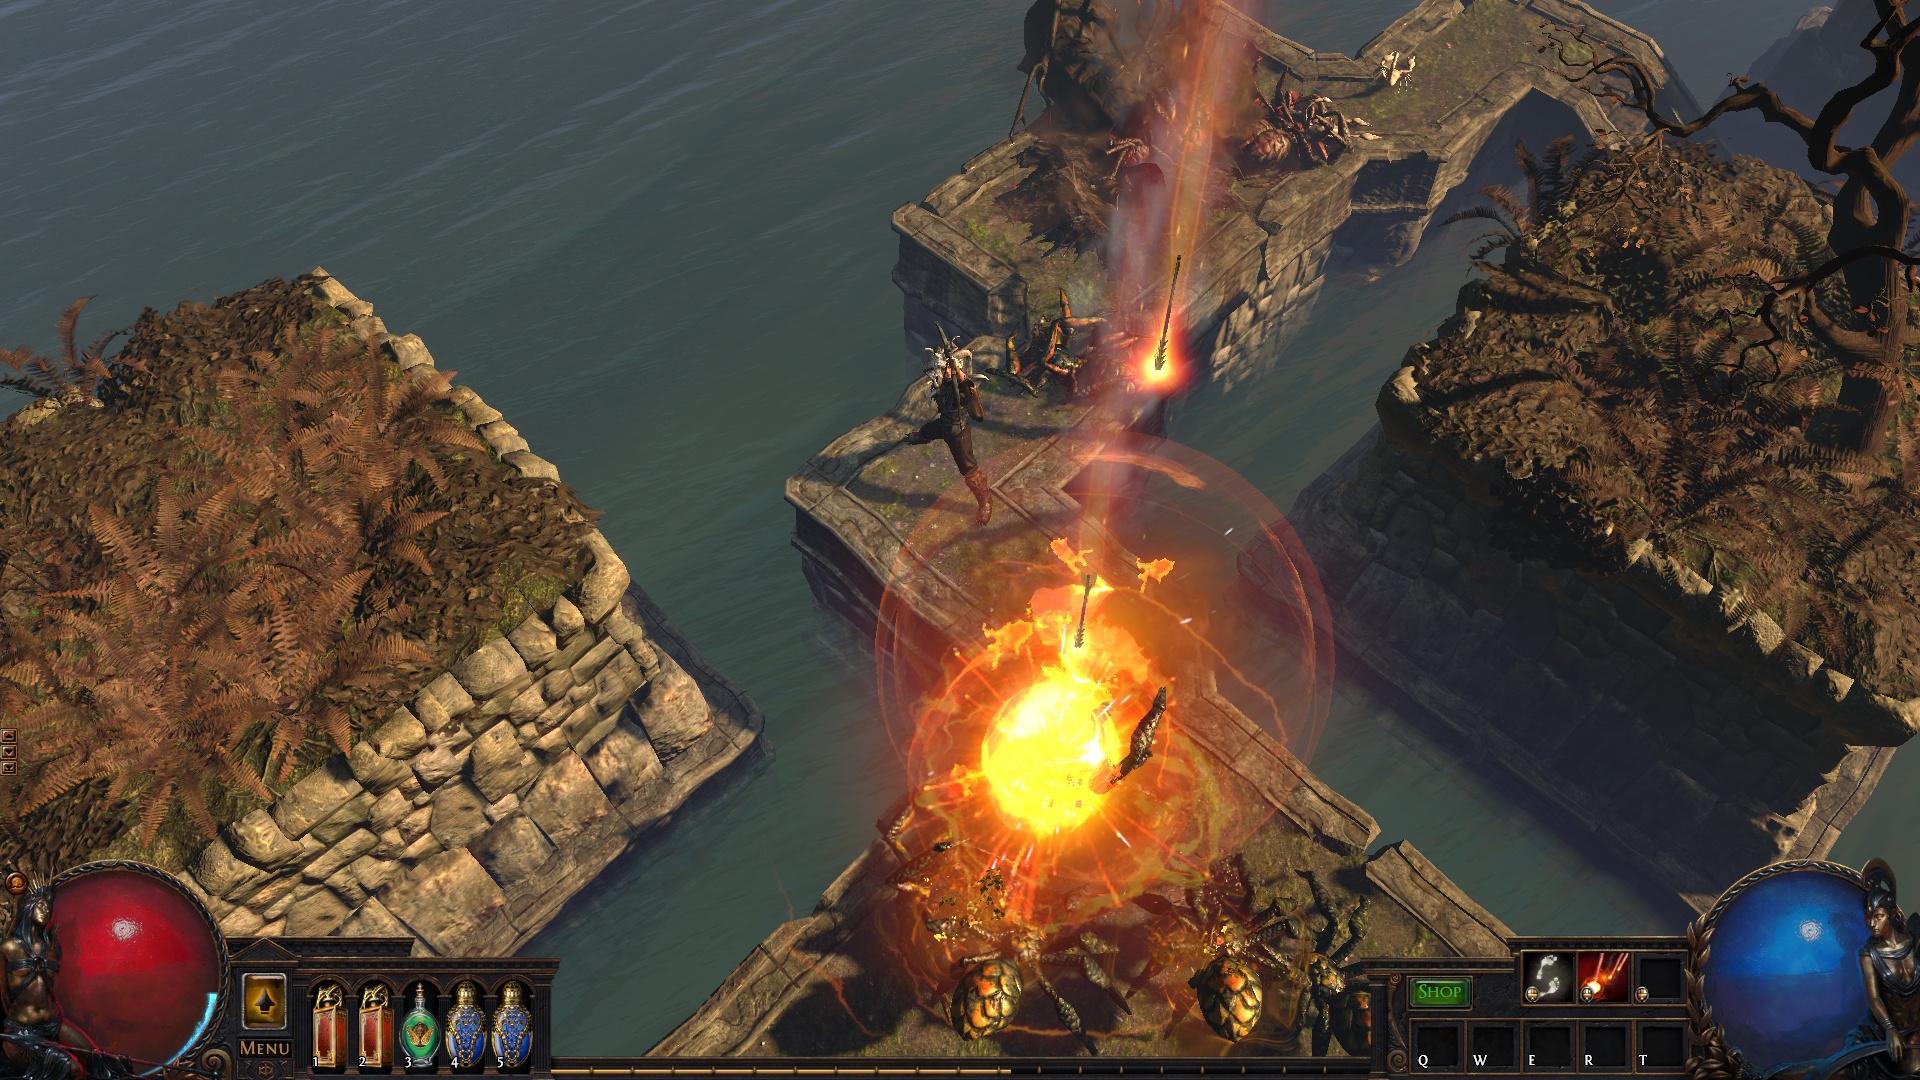 Screenshot №46 from game Path of Exile